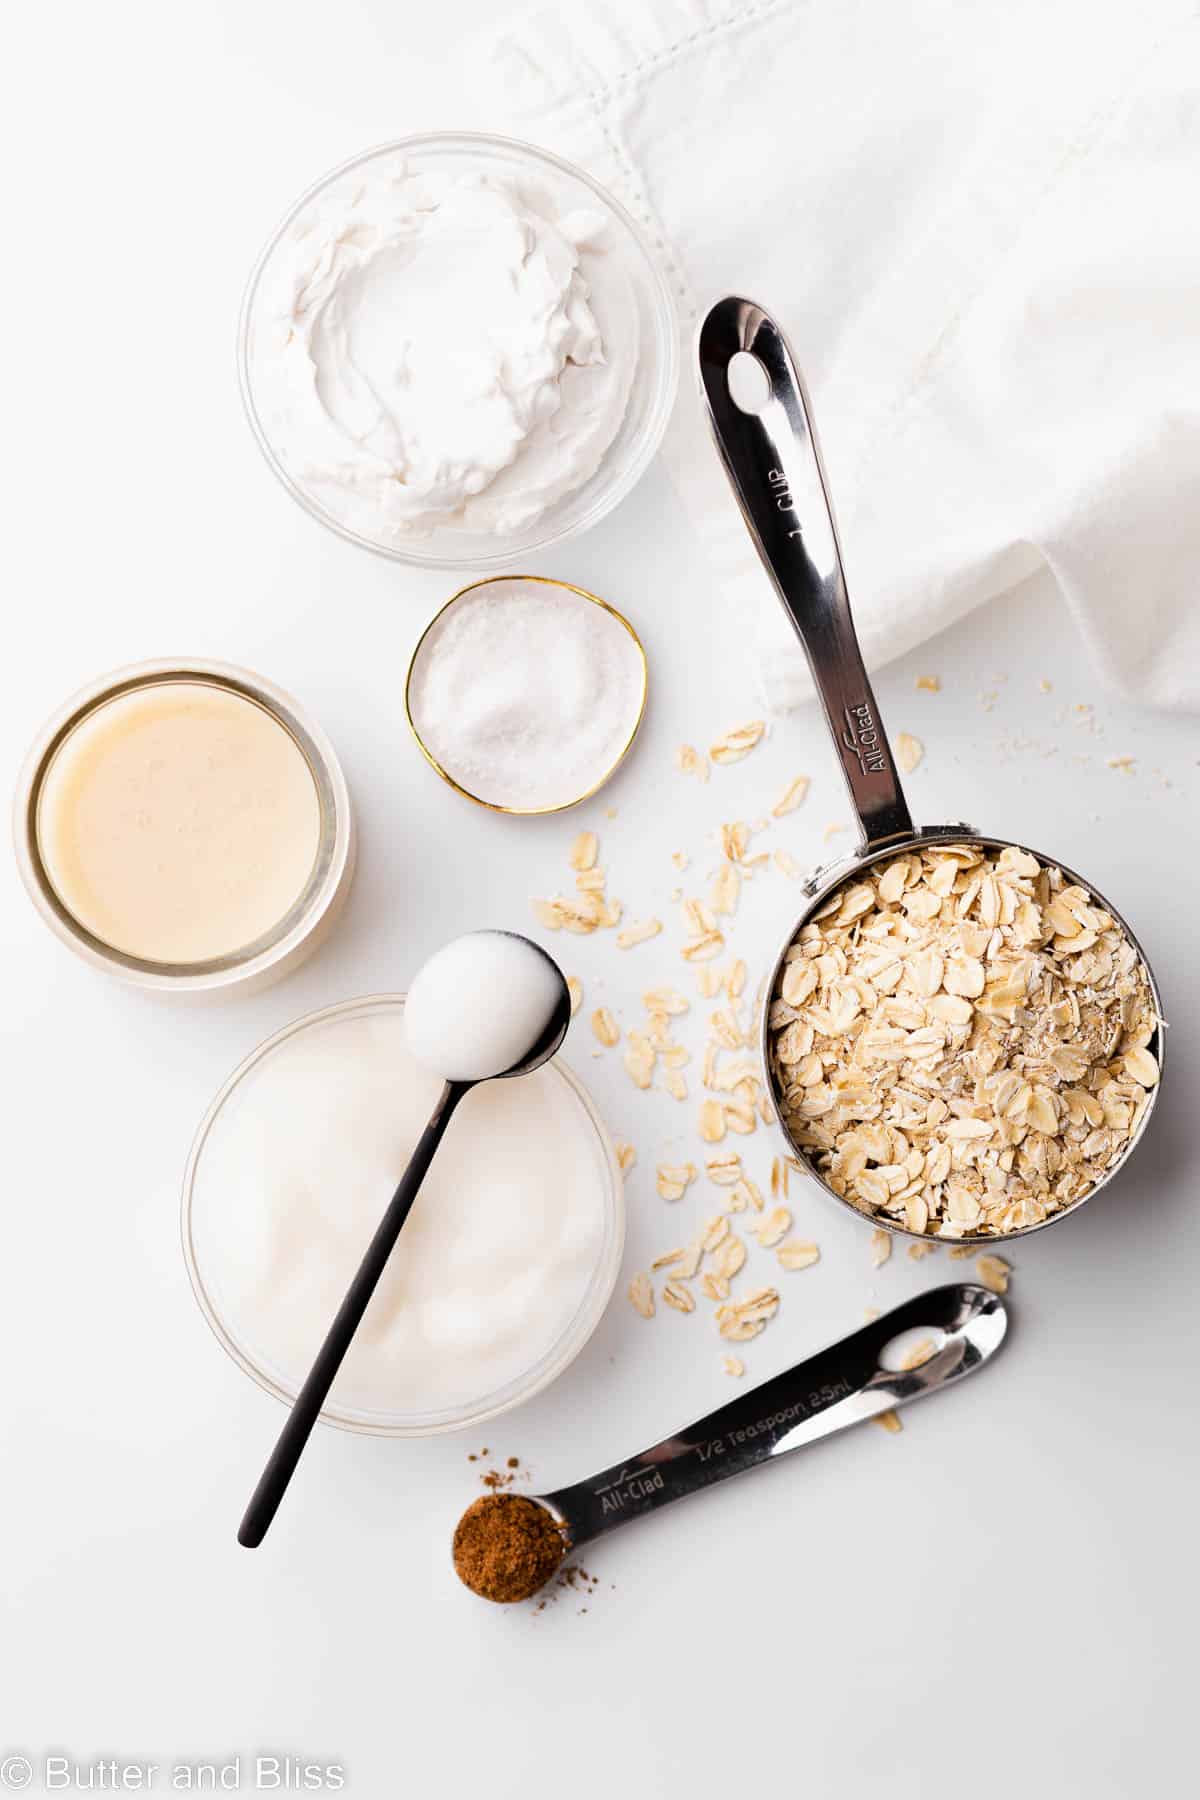 Ingredients for easy oat breakfast in small bowls arranged on a table.